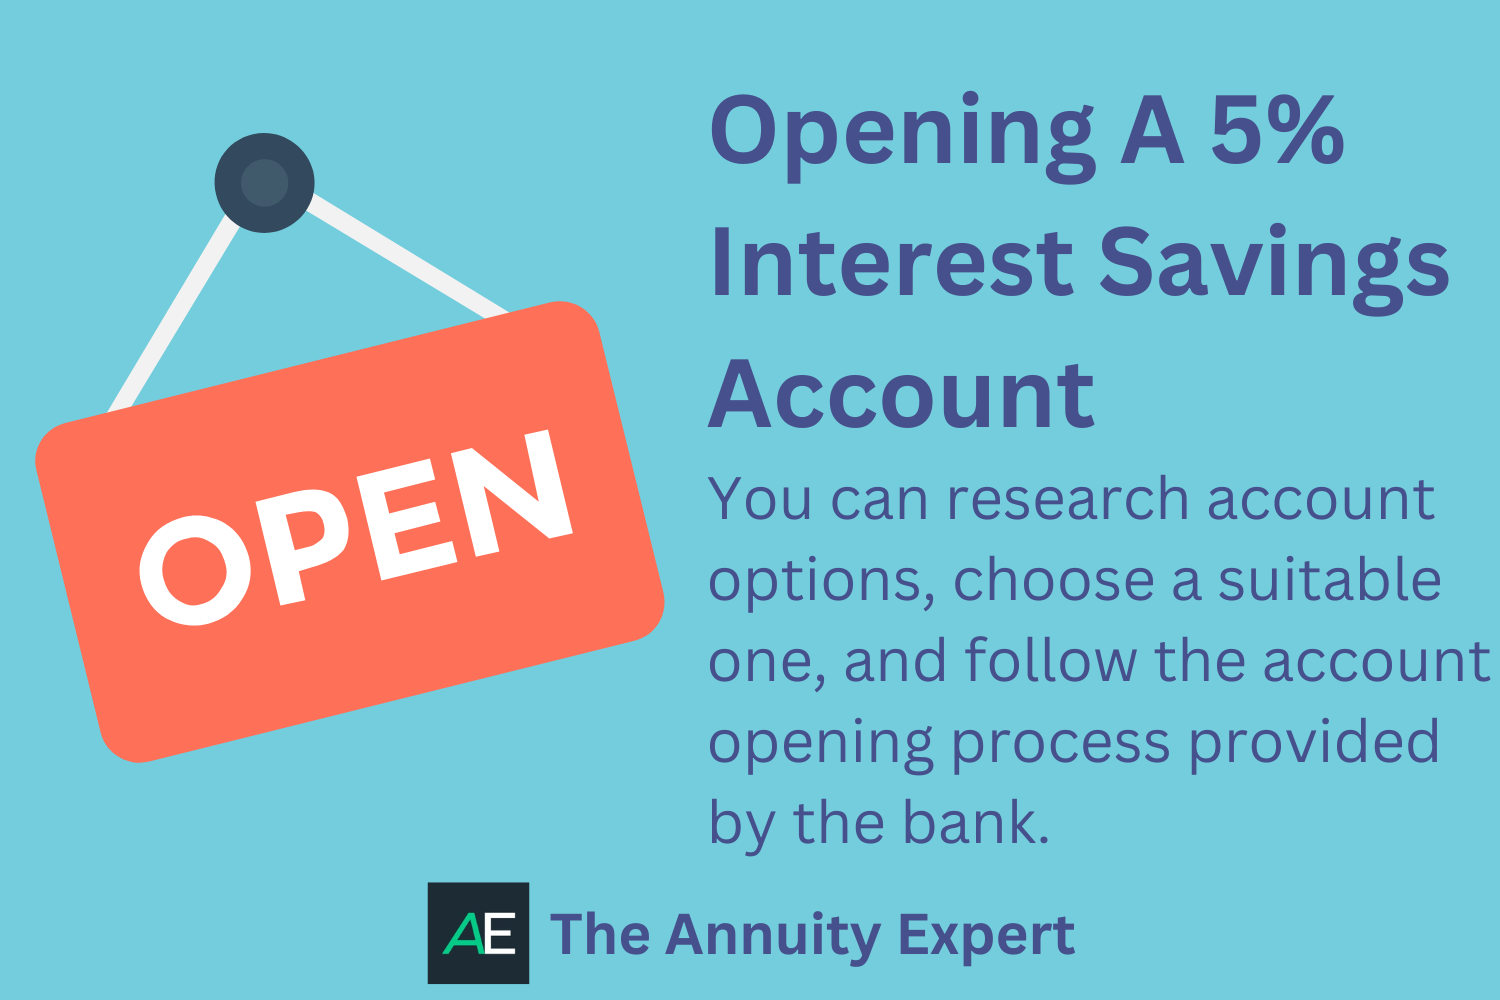 How To Open A 5% Interest Savings Account